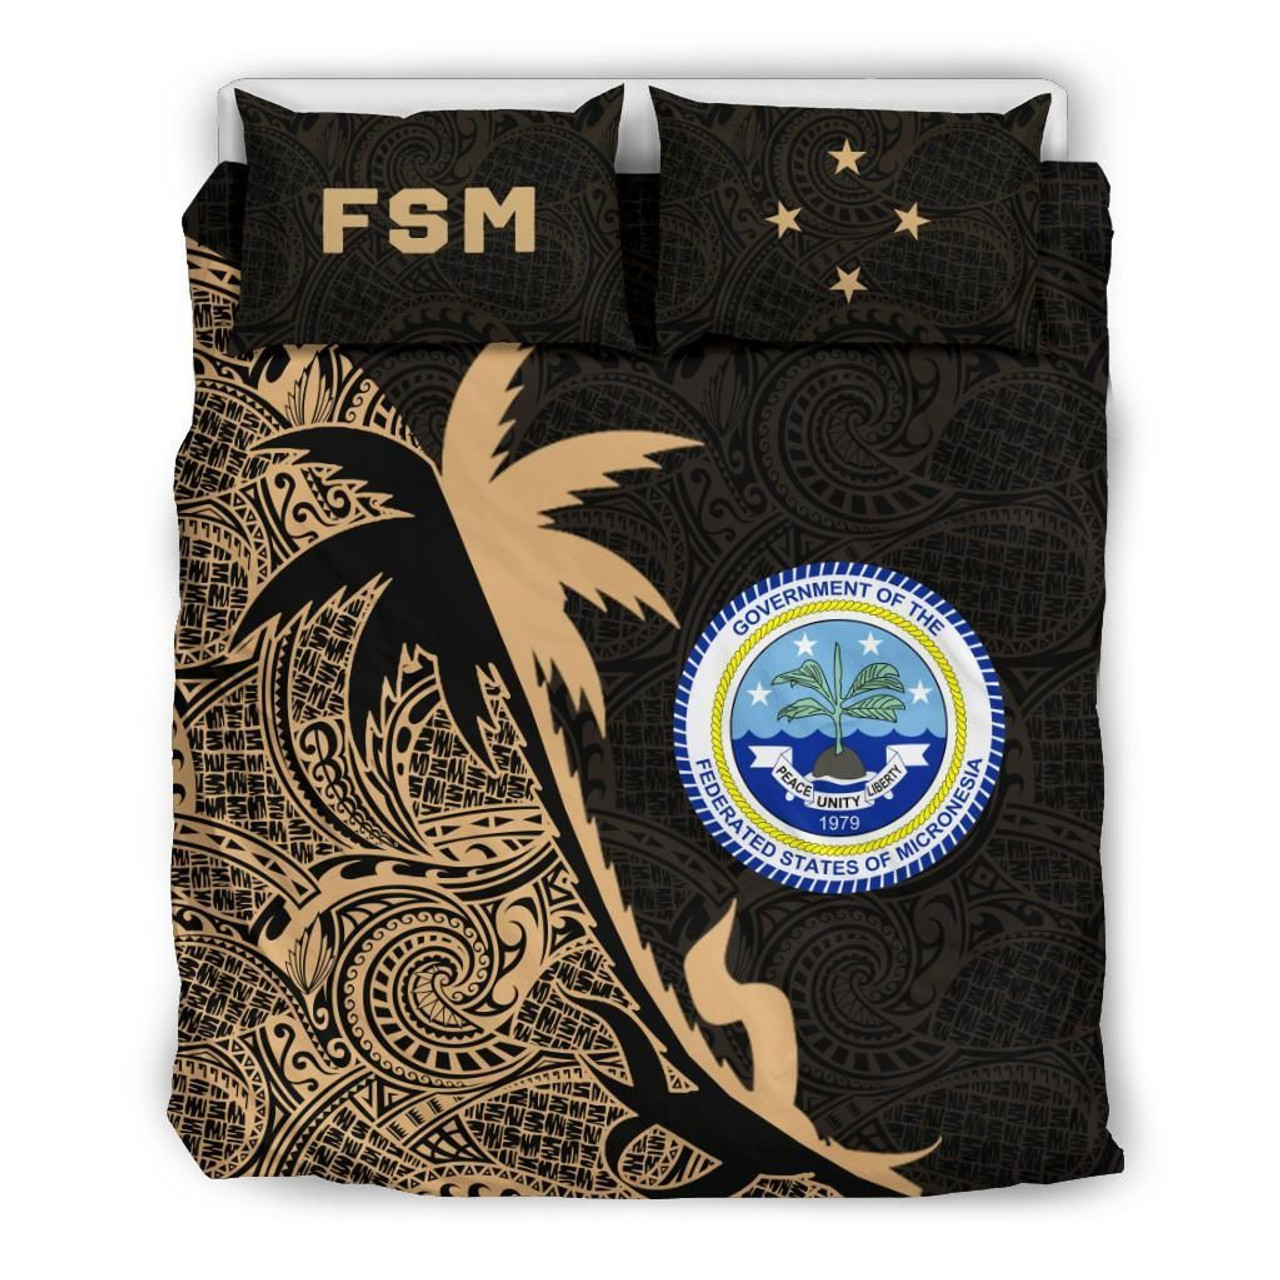 Federated States Of Micronesia Duvet Cover Set - Federated States Of Micronesia Coat Of Arms & Coconut Tree Gold 2